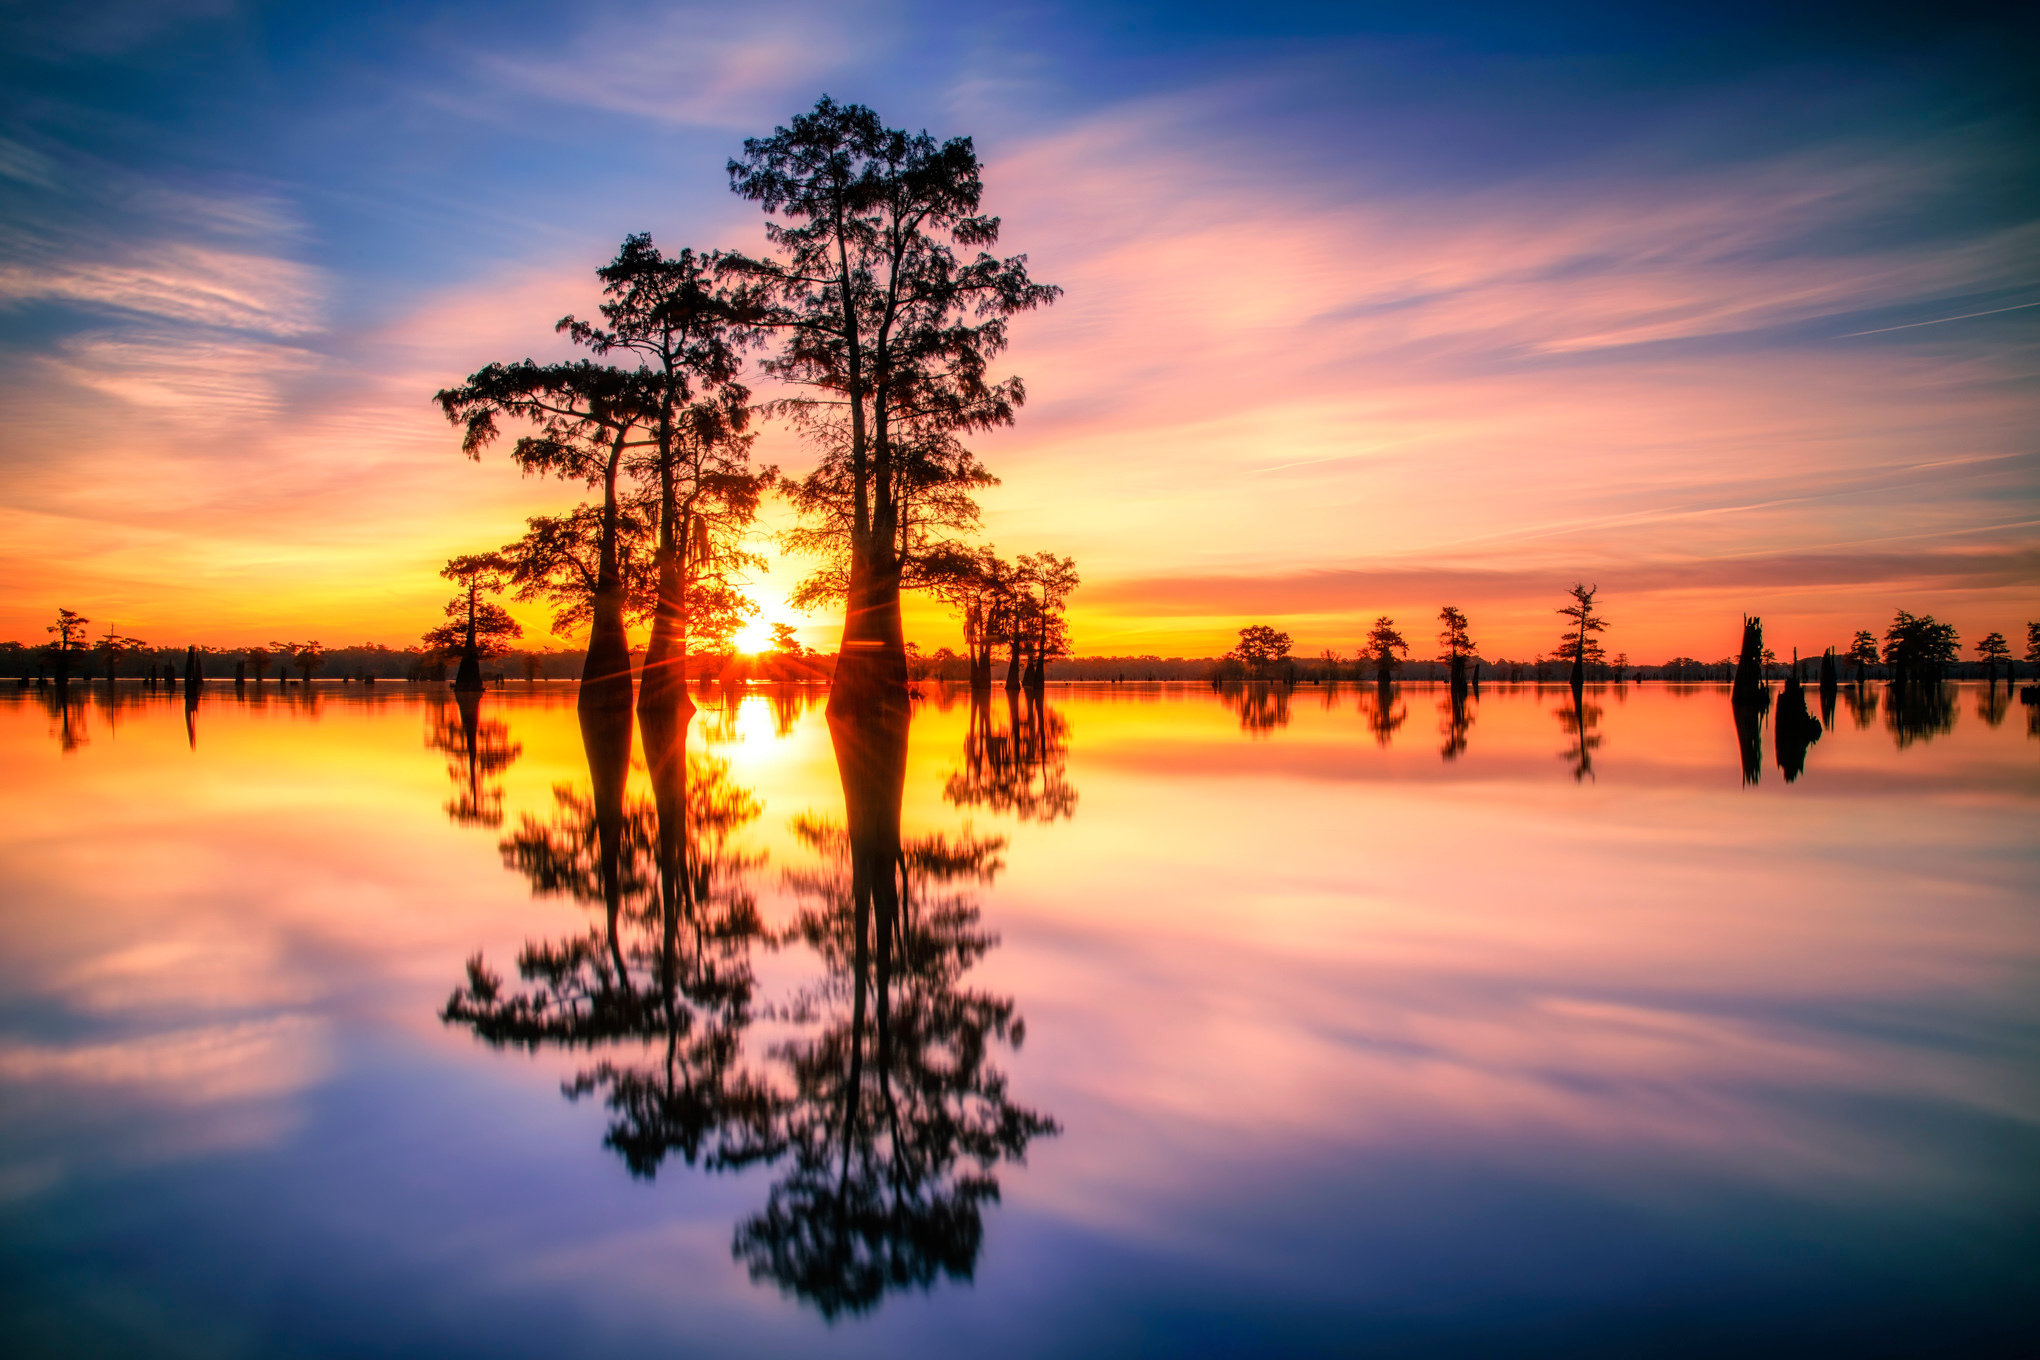 Andy crawford photography dawn in henderson swamp wrvlqz